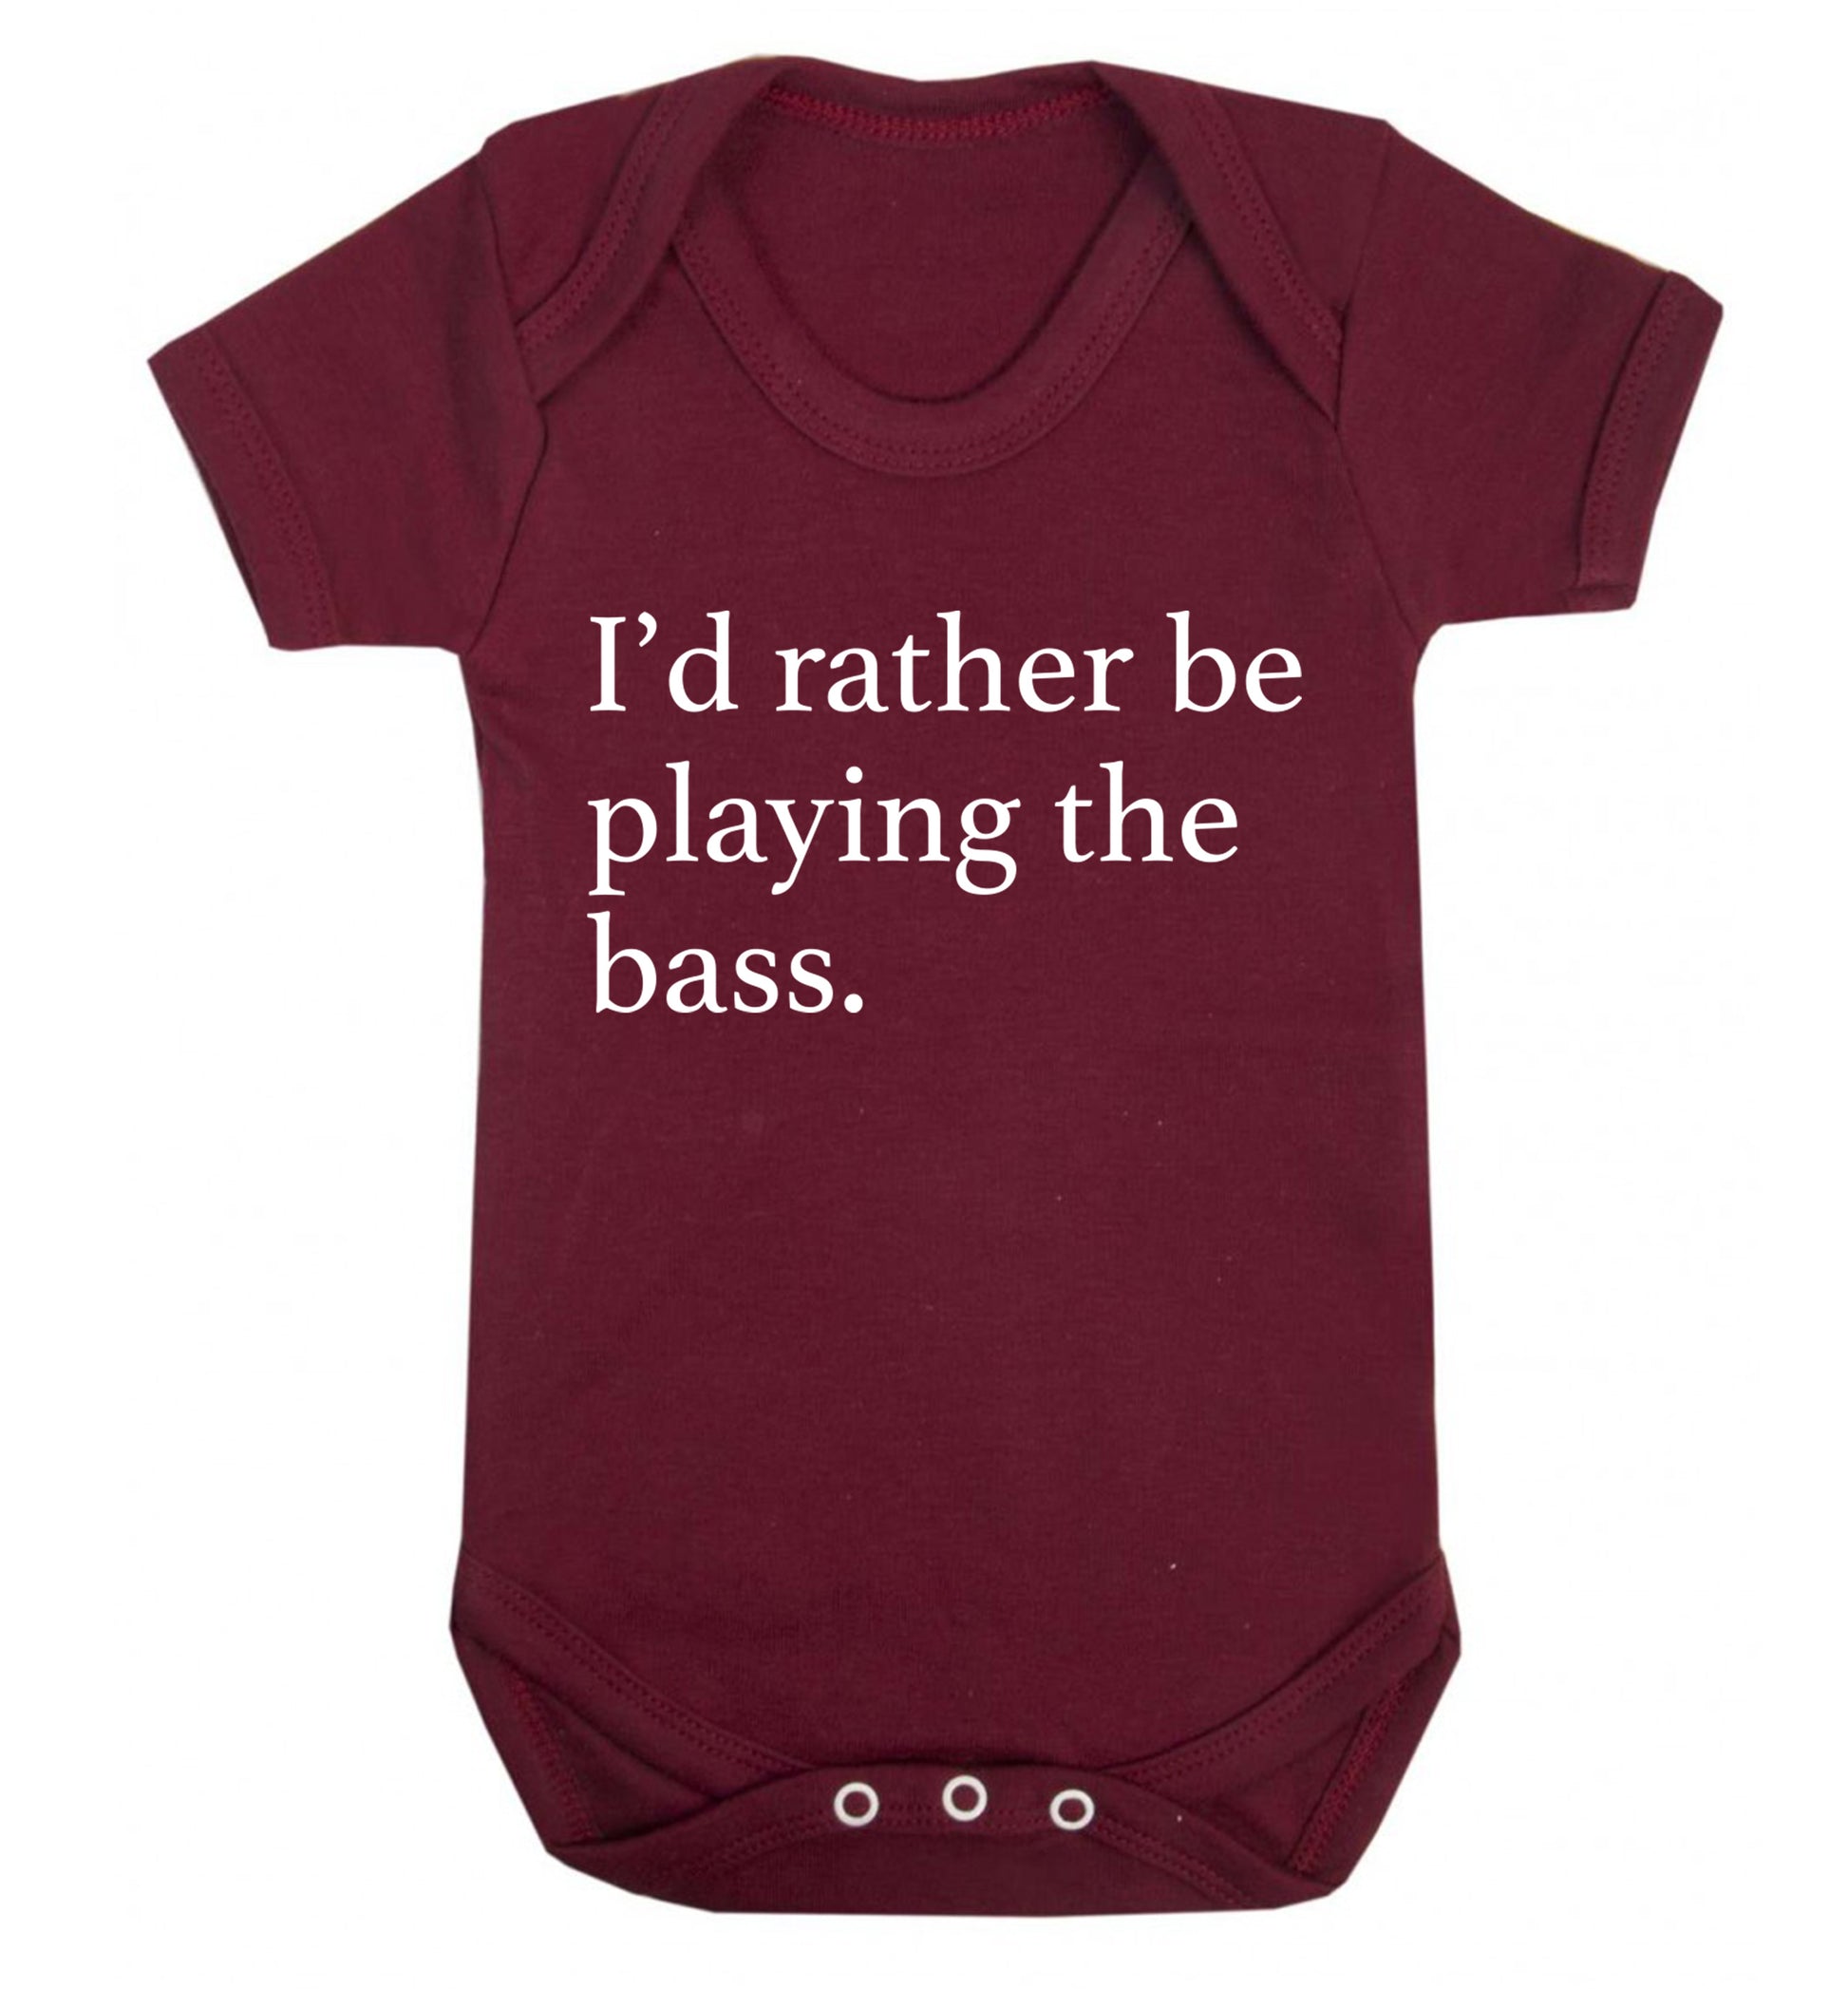 I'd rather by playing the bass Baby Vest maroon 18-24 months